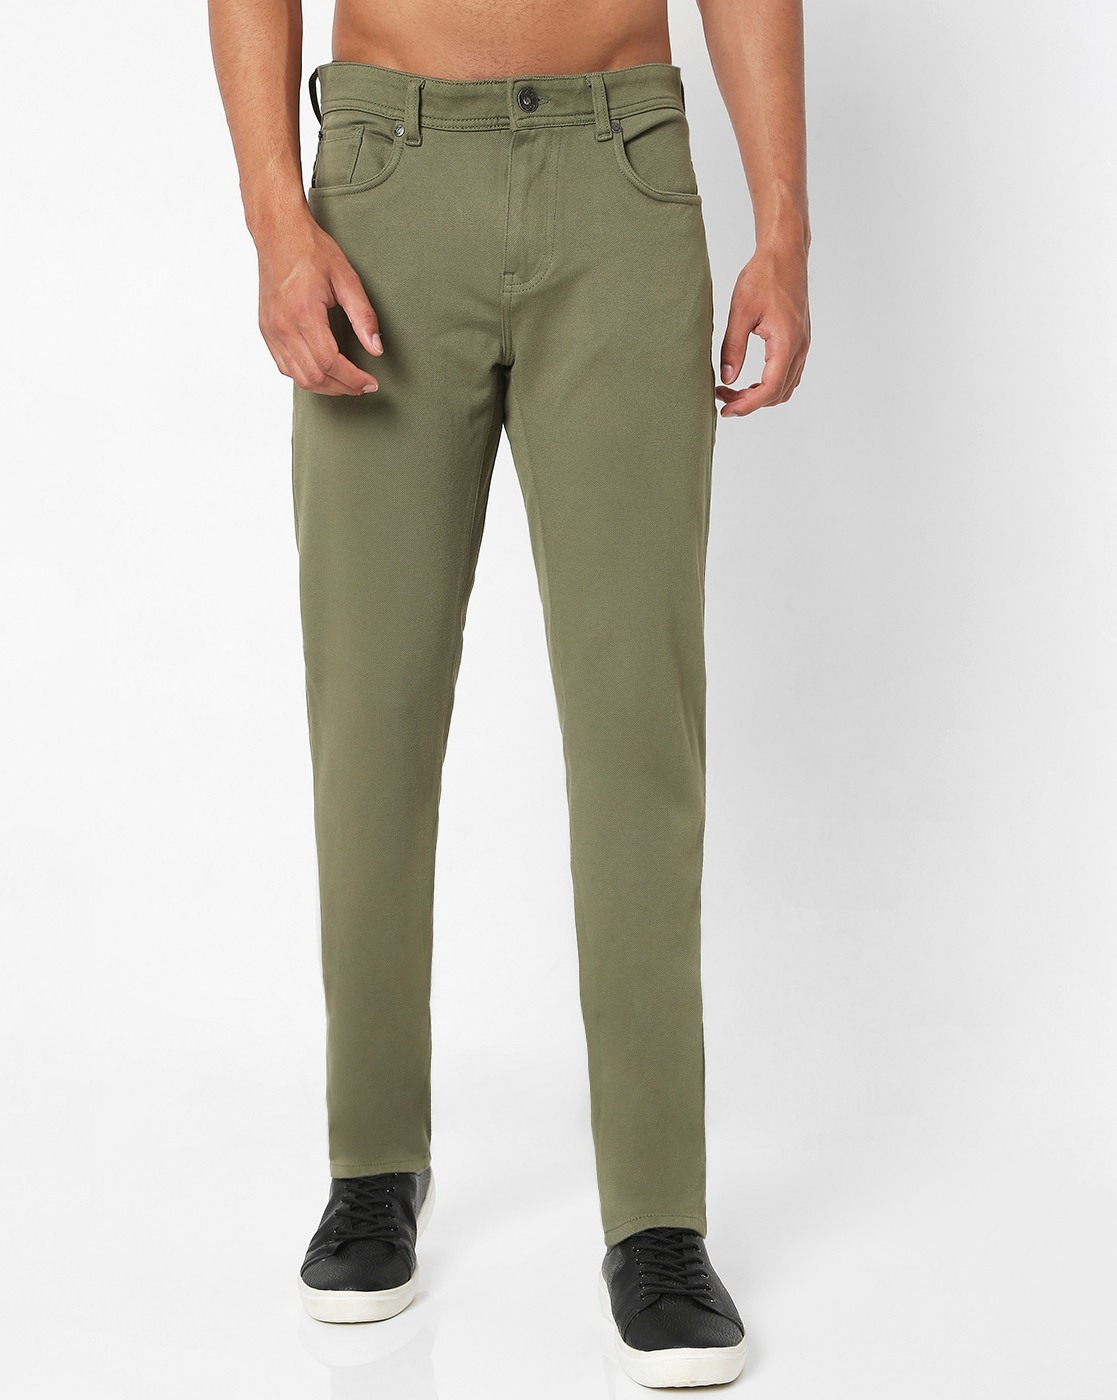 Buy Green Trousers & Pants for Men by GAS Online | Ajio.com